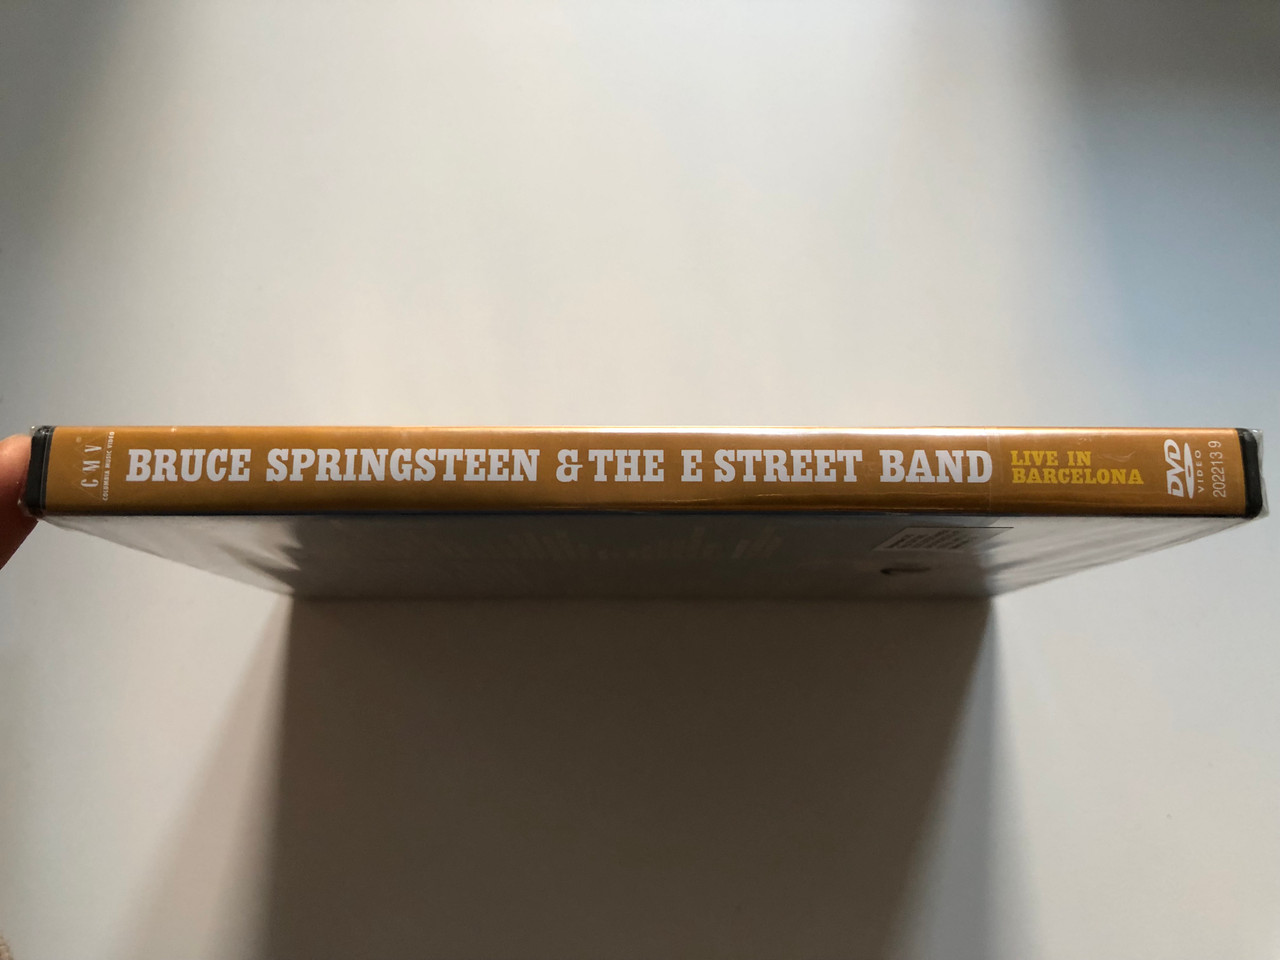 Bruce Springsteen & The E Street Band – Live In Barcelona / Columbia Music  Video, Columbia DVD Video - bibleinmylanguage